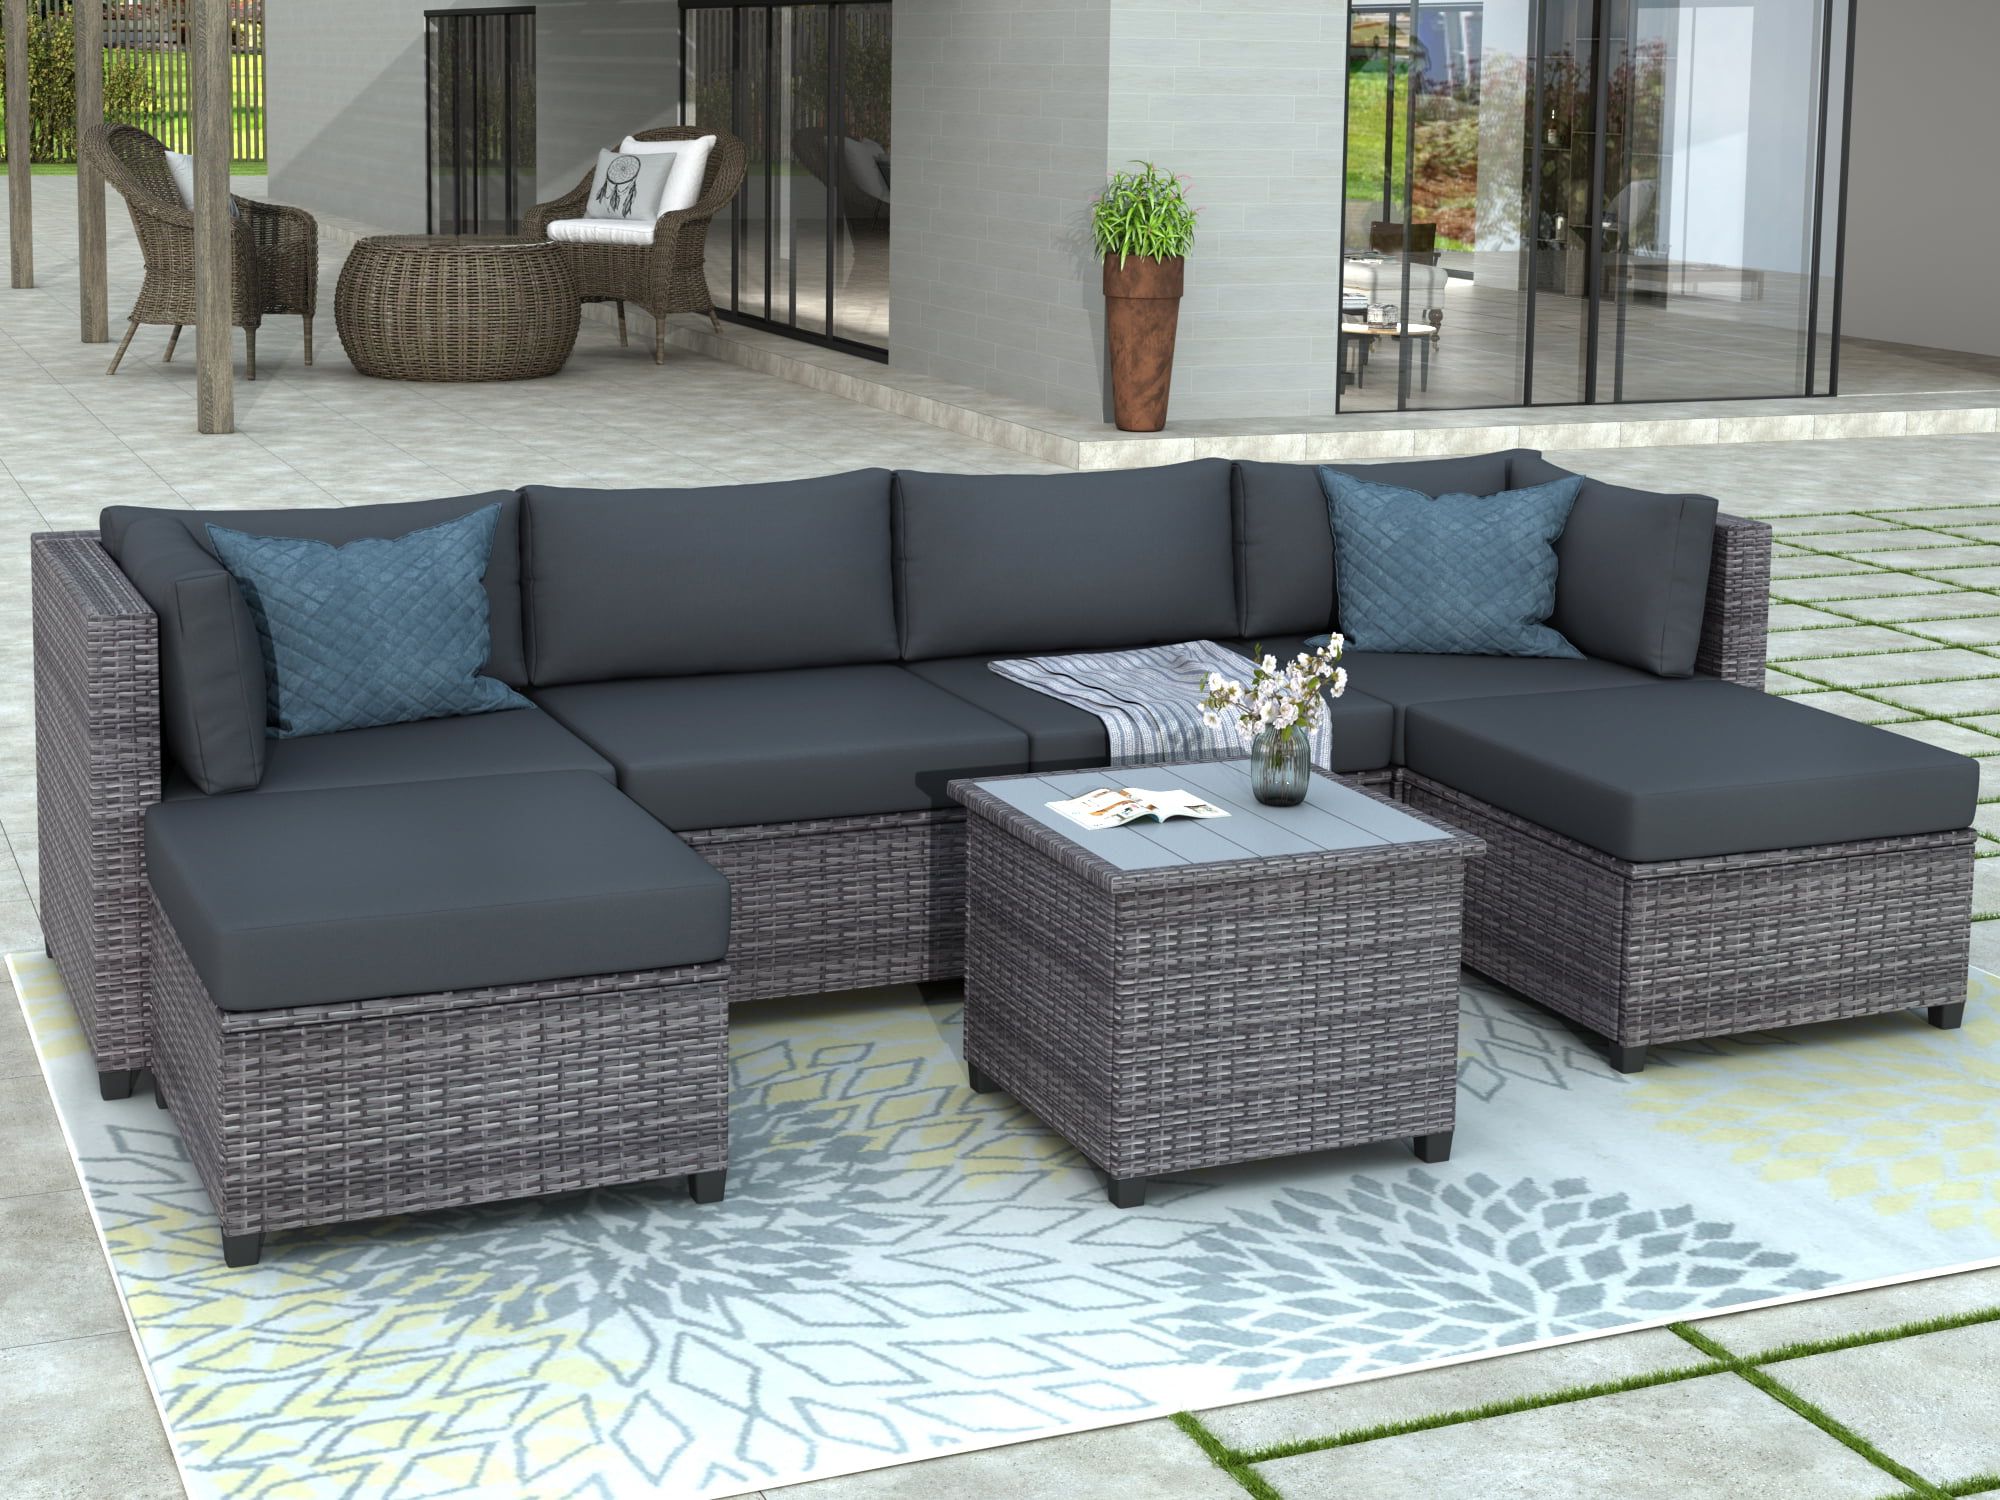 Most Up To Date Ottomans Patio Furniture Set Regarding 7 Piece Patio Furniture Set With 4 Rattan Wicker Chairs, 2 Ottoman, Coffee  Table, All Weather Outdoor Conversation Set With Gray Cushions For  Backyard, Porch, Garden, Poolside, L5017 – Walmart (View 13 of 15)